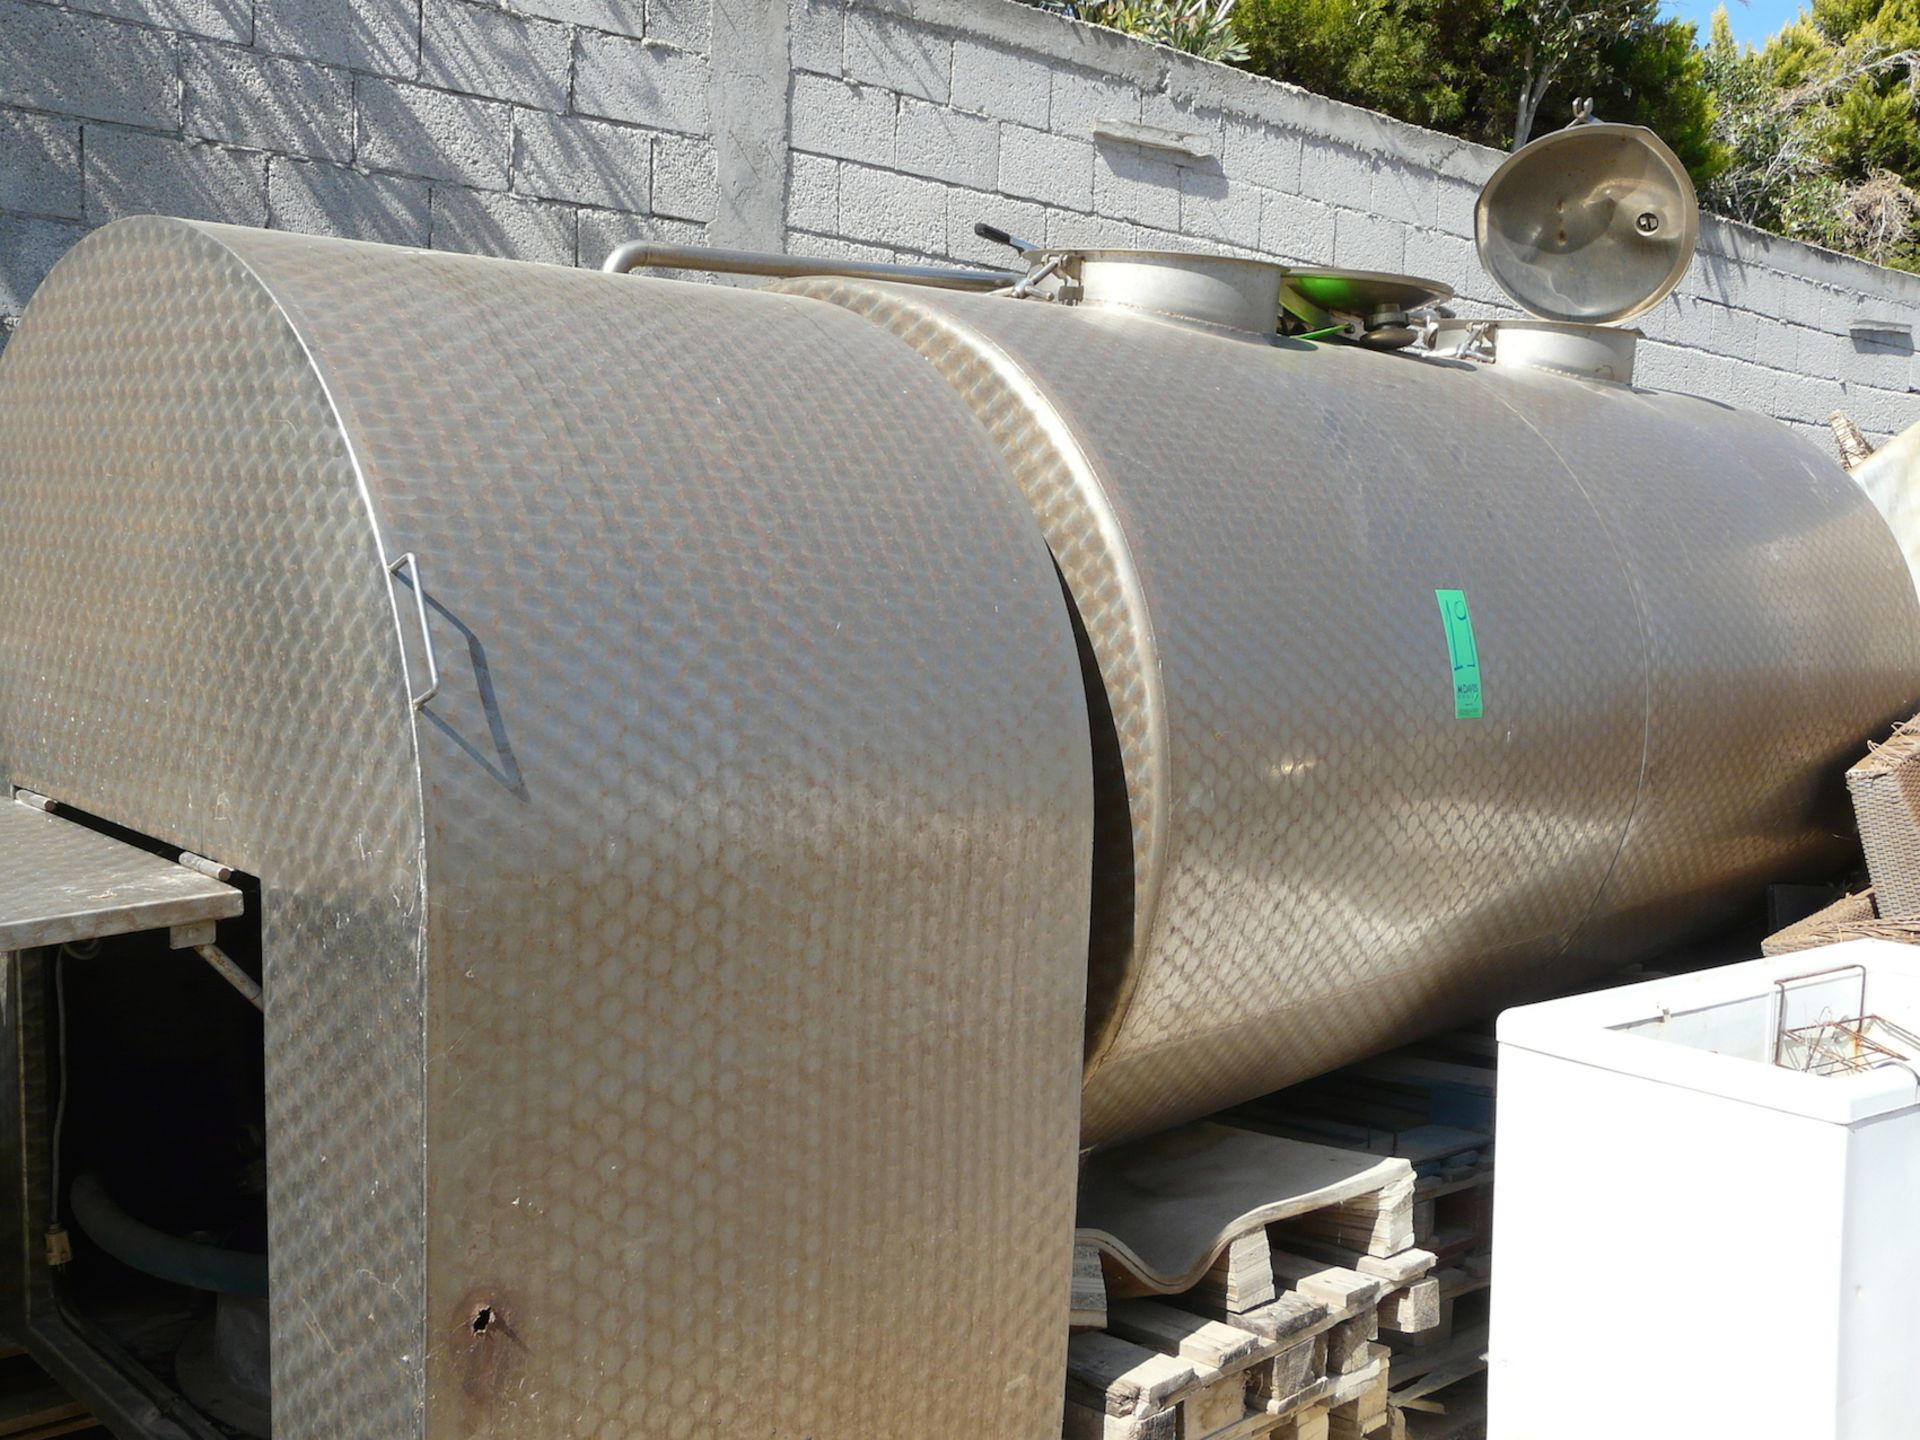 English: Double Jacketed Transport Tank for 3000L with Two Chambers for a total of 3000L. Transfer